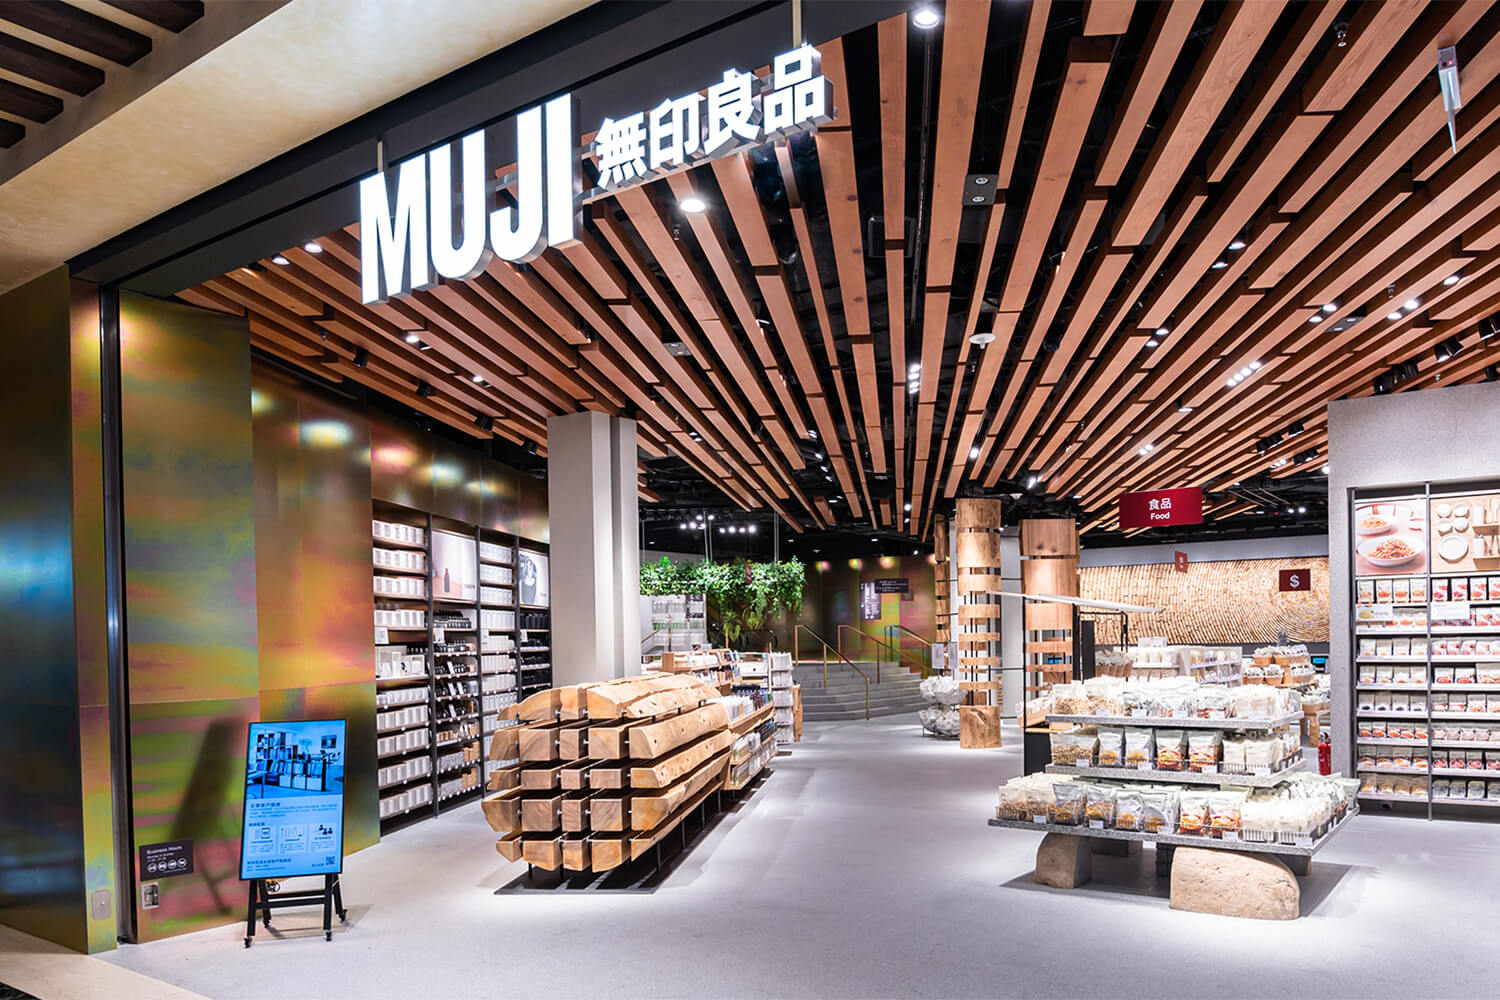 Top 5 Most Loved Stationery Products from Muji for Stationery